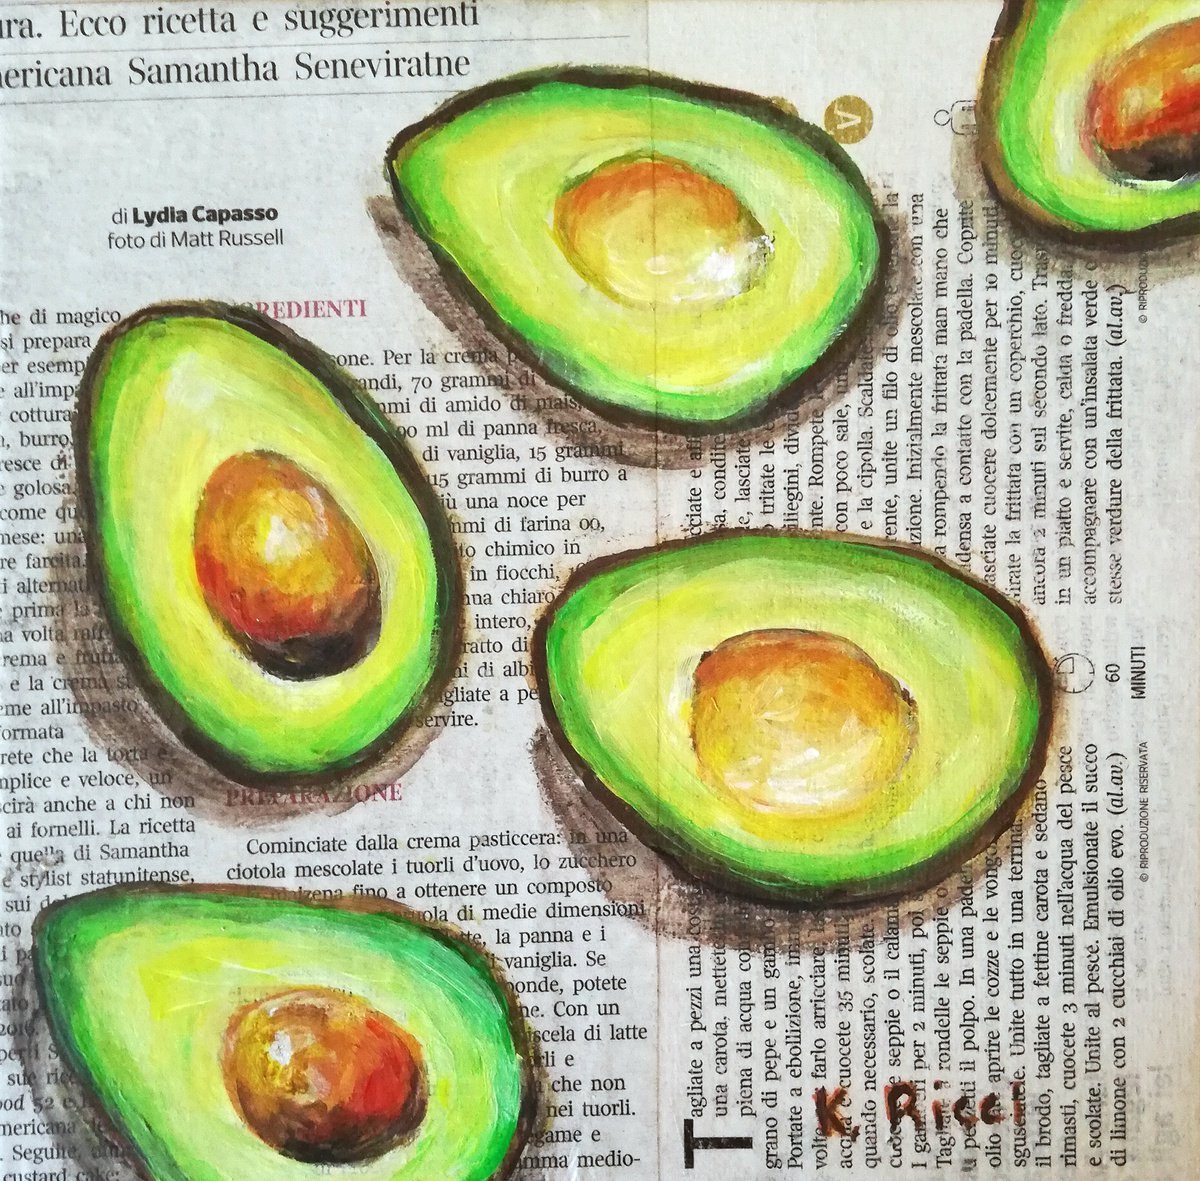 Avocadoes on Newspaper Original Acrylic on Canvas Board Painting 8 by 8 inches (20x20 cm... by Katia Ricci